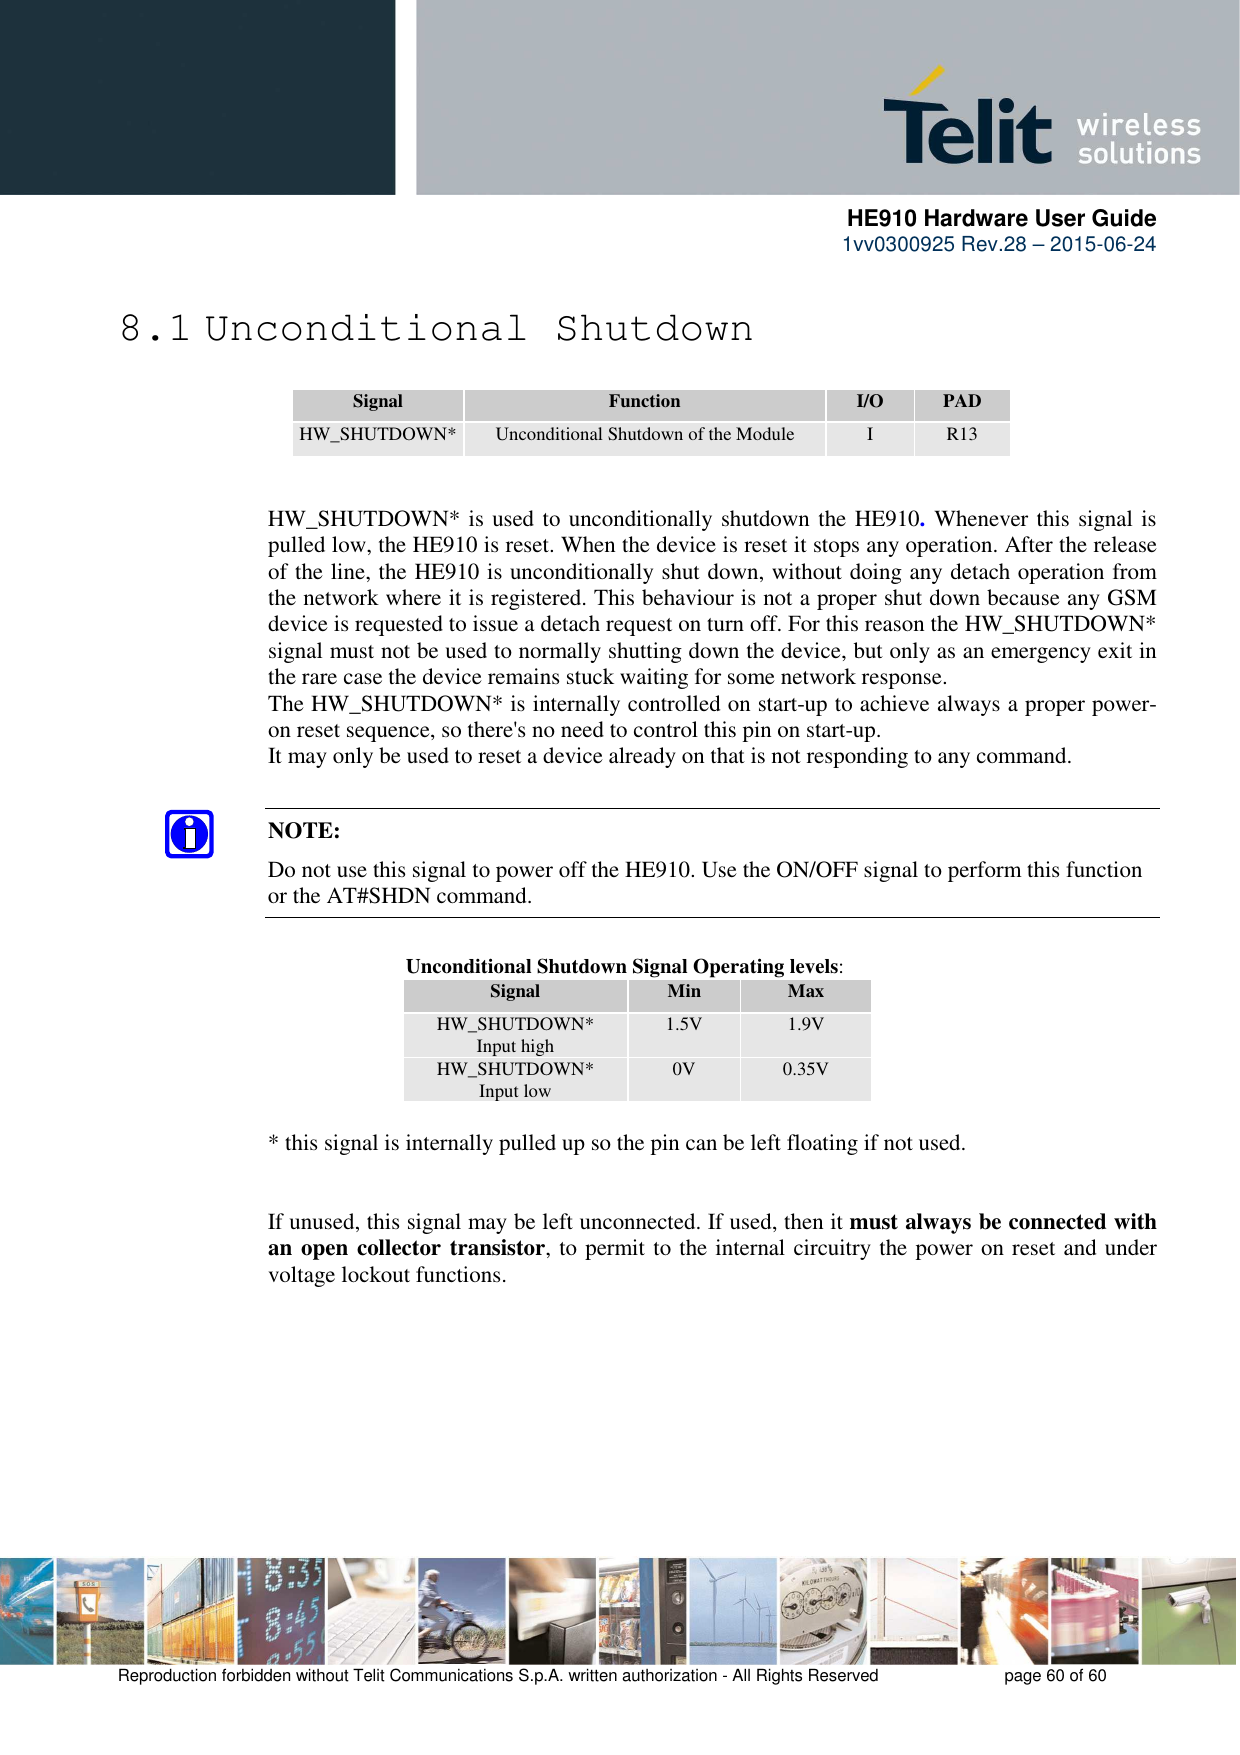      HE910 Hardware User Guide 1vv0300925 Rev.28 – 2015-06-24    Reproduction forbidden without Telit Communications S.p.A. written authorization - All Rights Reserved    page 60 of 60  8.1 Unconditional Shutdown  Signal  Function  I/O  PAD HW_SHUTDOWN* Unconditional Shutdown of the Module  I  R13   HW_SHUTDOWN* is used to unconditionally shutdown the HE910. Whenever this signal is pulled low, the HE910 is reset. When the device is reset it stops any operation. After the release of the line, the HE910 is unconditionally shut down, without doing any detach operation from the network where it is registered. This behaviour is not a proper shut down because any GSM device is requested to issue a detach request on turn off. For this reason the HW_SHUTDOWN* signal must not be used to normally shutting down the device, but only as an emergency exit in the rare case the device remains stuck waiting for some network response. The HW_SHUTDOWN* is internally controlled on start-up to achieve always a proper power-on reset sequence, so there&apos;s no need to control this pin on start-up.  It may only be used to reset a device already on that is not responding to any command.  NOTE: Do not use this signal to power off the HE910. Use the ON/OFF signal to perform this function or the AT#SHDN command.         Unconditional Shutdown Signal Operating levels: Signal  Min  Max HW_SHUTDOWN*   Input high  1.5V  1.9V HW_SHUTDOWN*   Input low  0V  0.35V  * this signal is internally pulled up so the pin can be left floating if not used.   If unused, this signal may be left unconnected. If used, then it must always be connected with an open collector transistor, to permit to the internal circuitry the power on reset and under voltage lockout functions.     